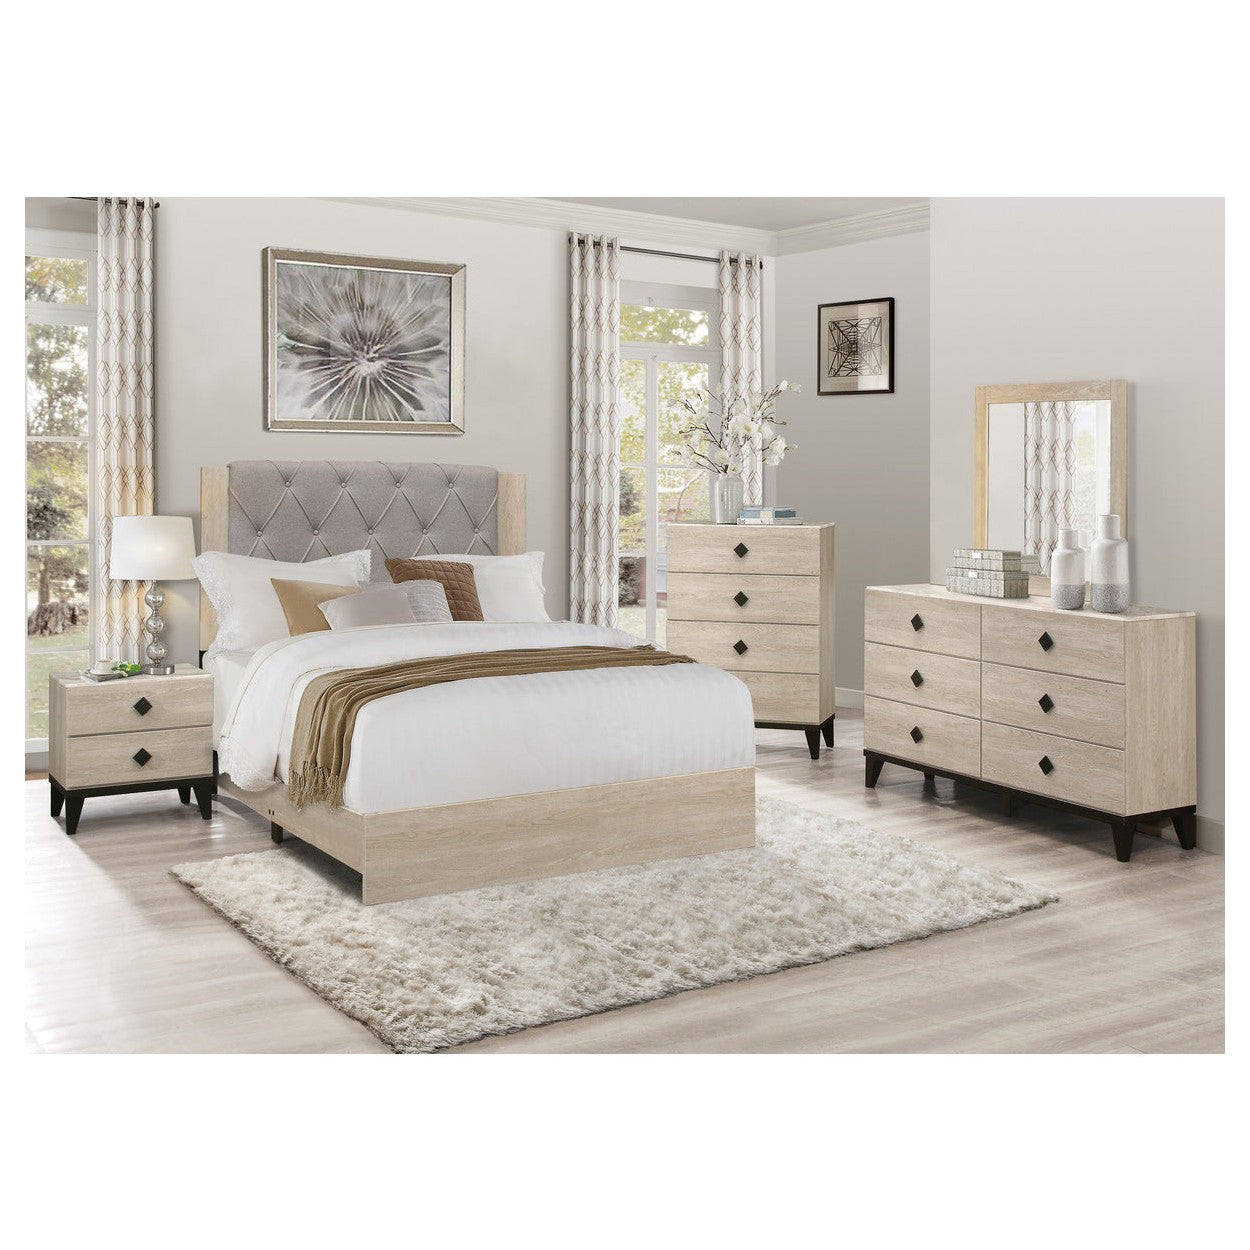 California King Bed in a Box 1524K-1CK